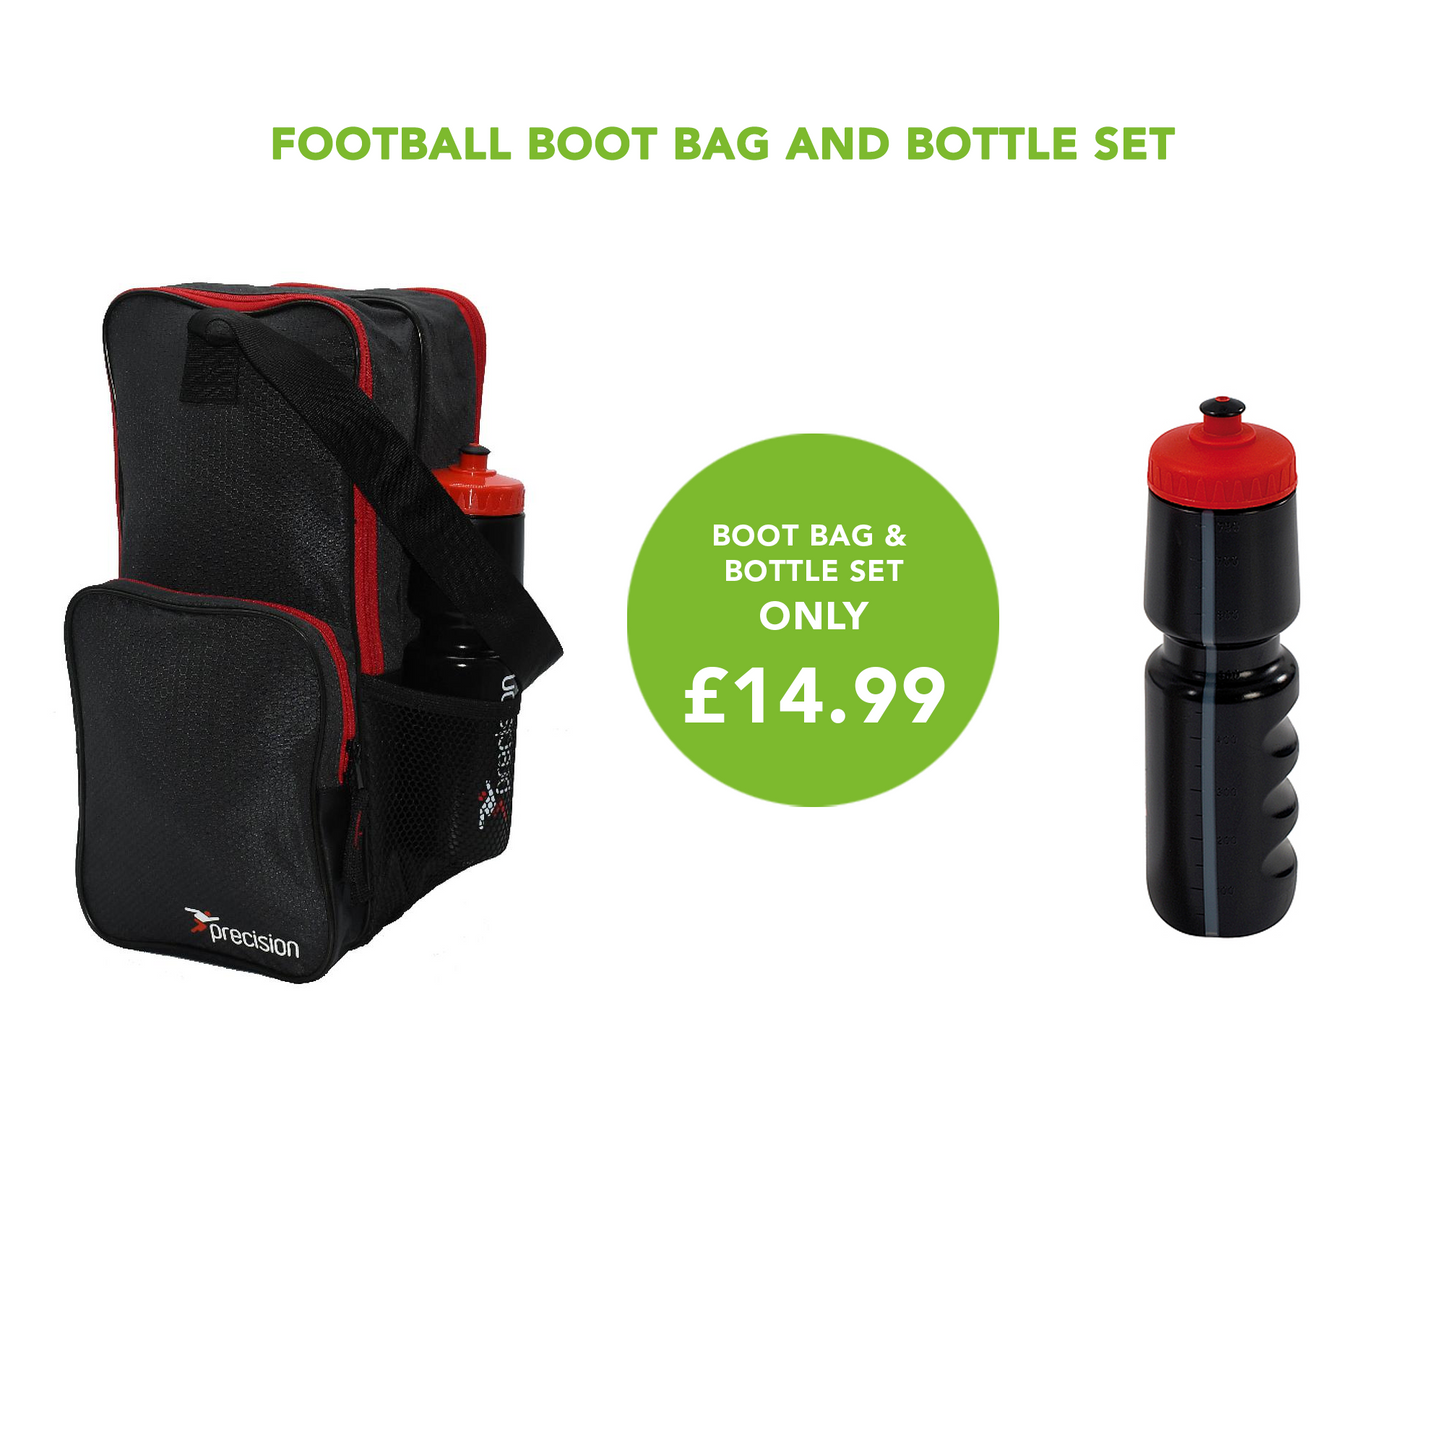 Precision Pro HX Shoe Bag fits 2 pairs of football boots